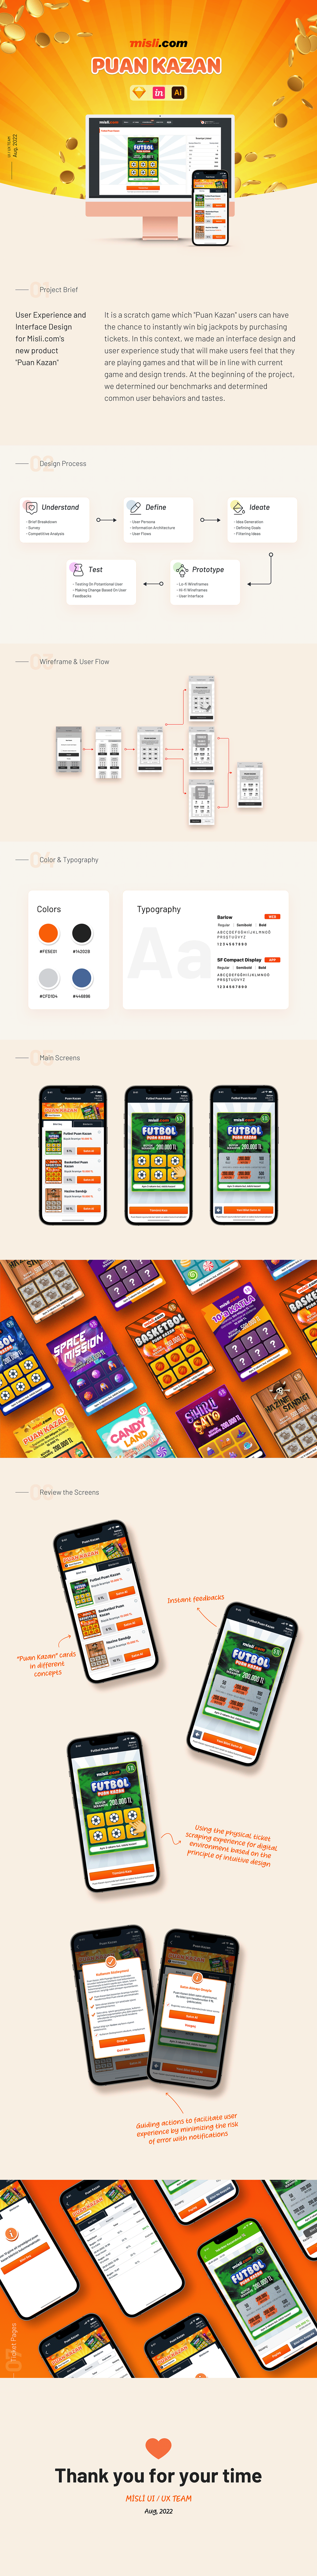 app betting casino Gaming Interaction design  UI/UX user experience user interface design User research Web Design 